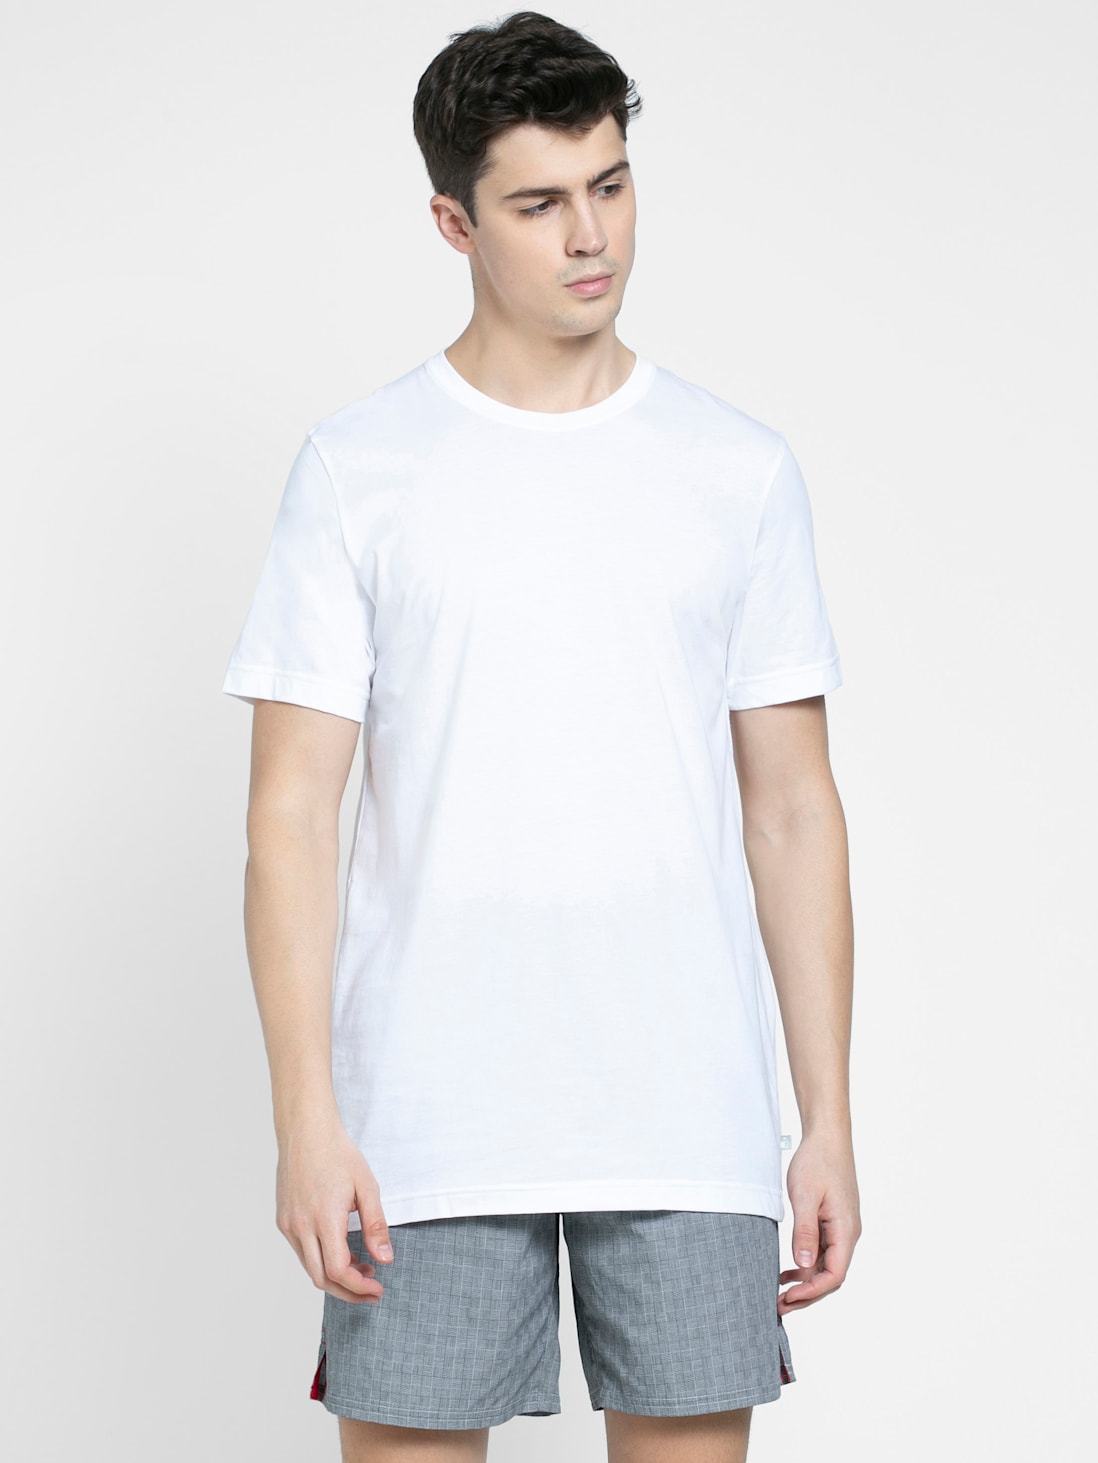 Buy Men's Super Combed Cotton Sleeved Inner T-Shirt with Extended